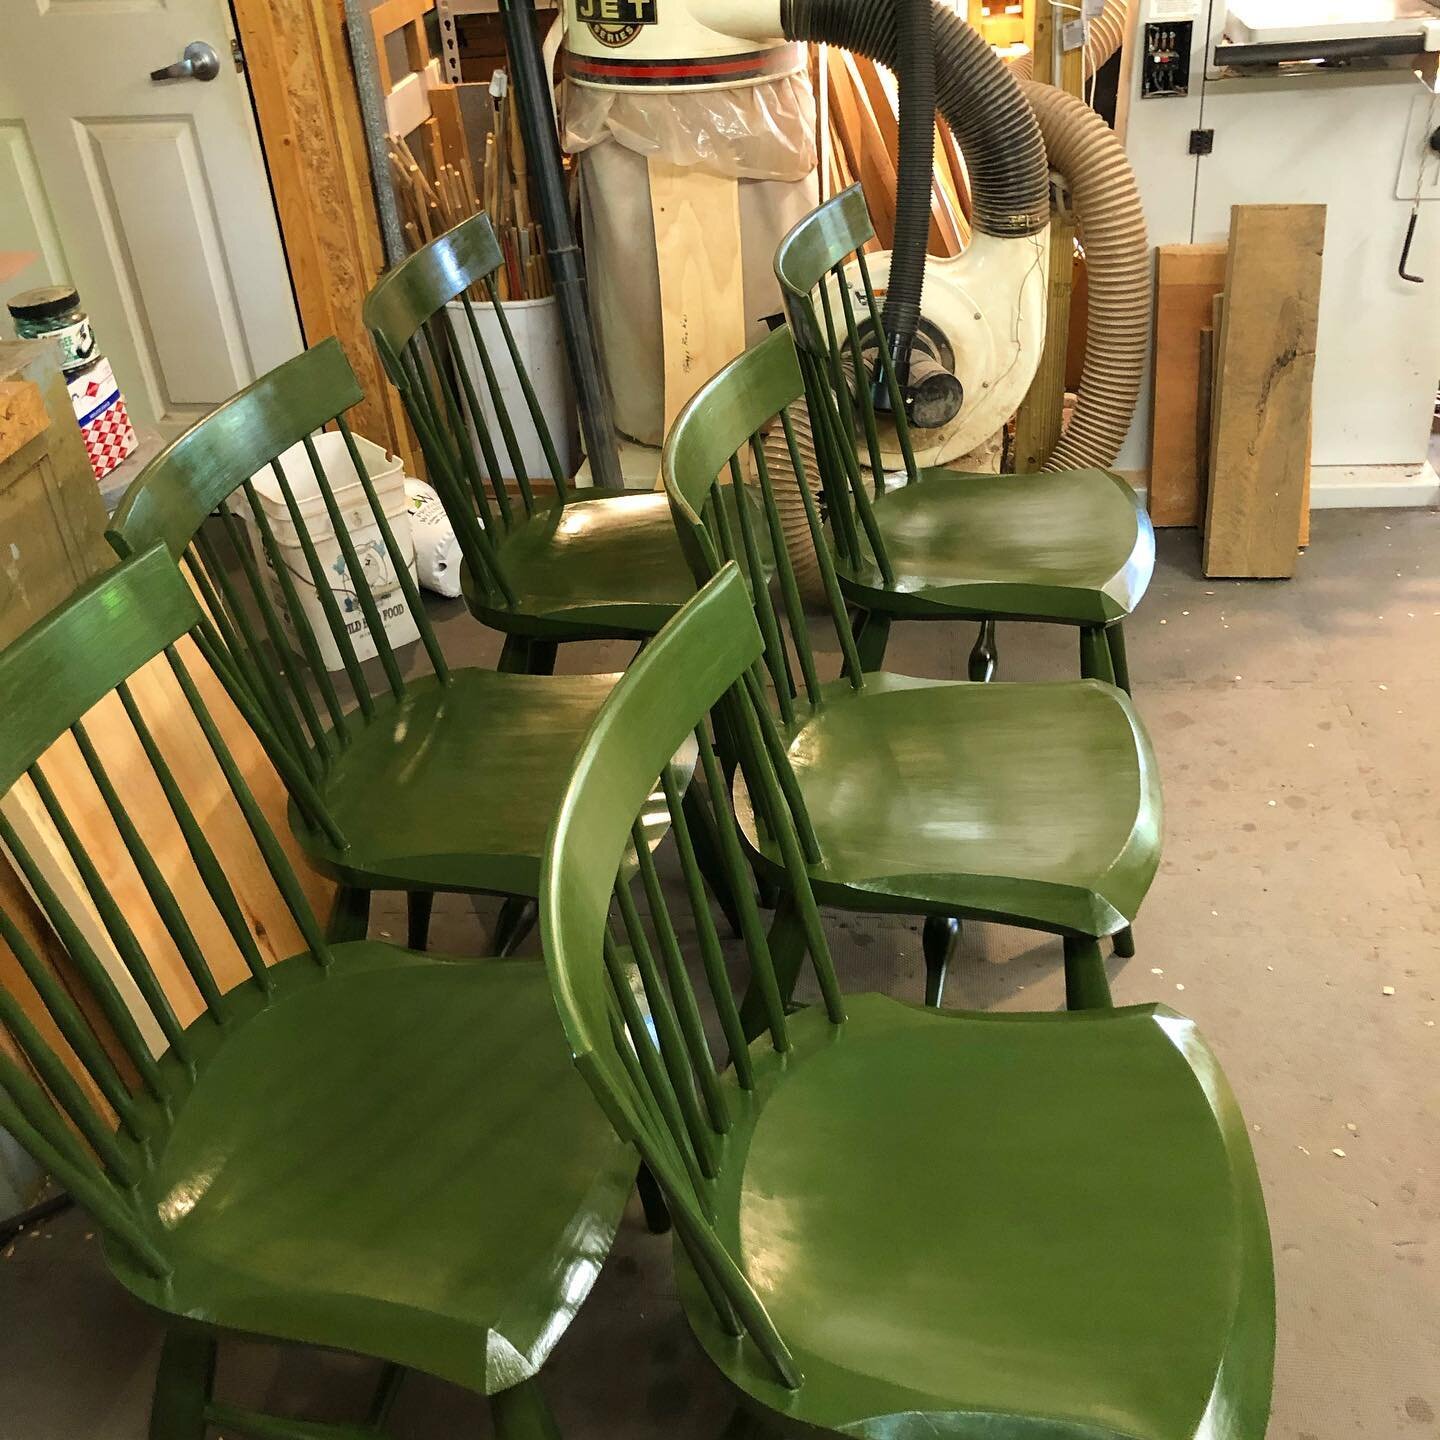 Set of low back Windsor chairs ready to head out to their forever home. Typical of windsors they have maple legs and stretchers. A pine seat and white oak crest and spindles. 

#chair #diningchair #chairmaking #painted #paintedfurniture #shakerinspir